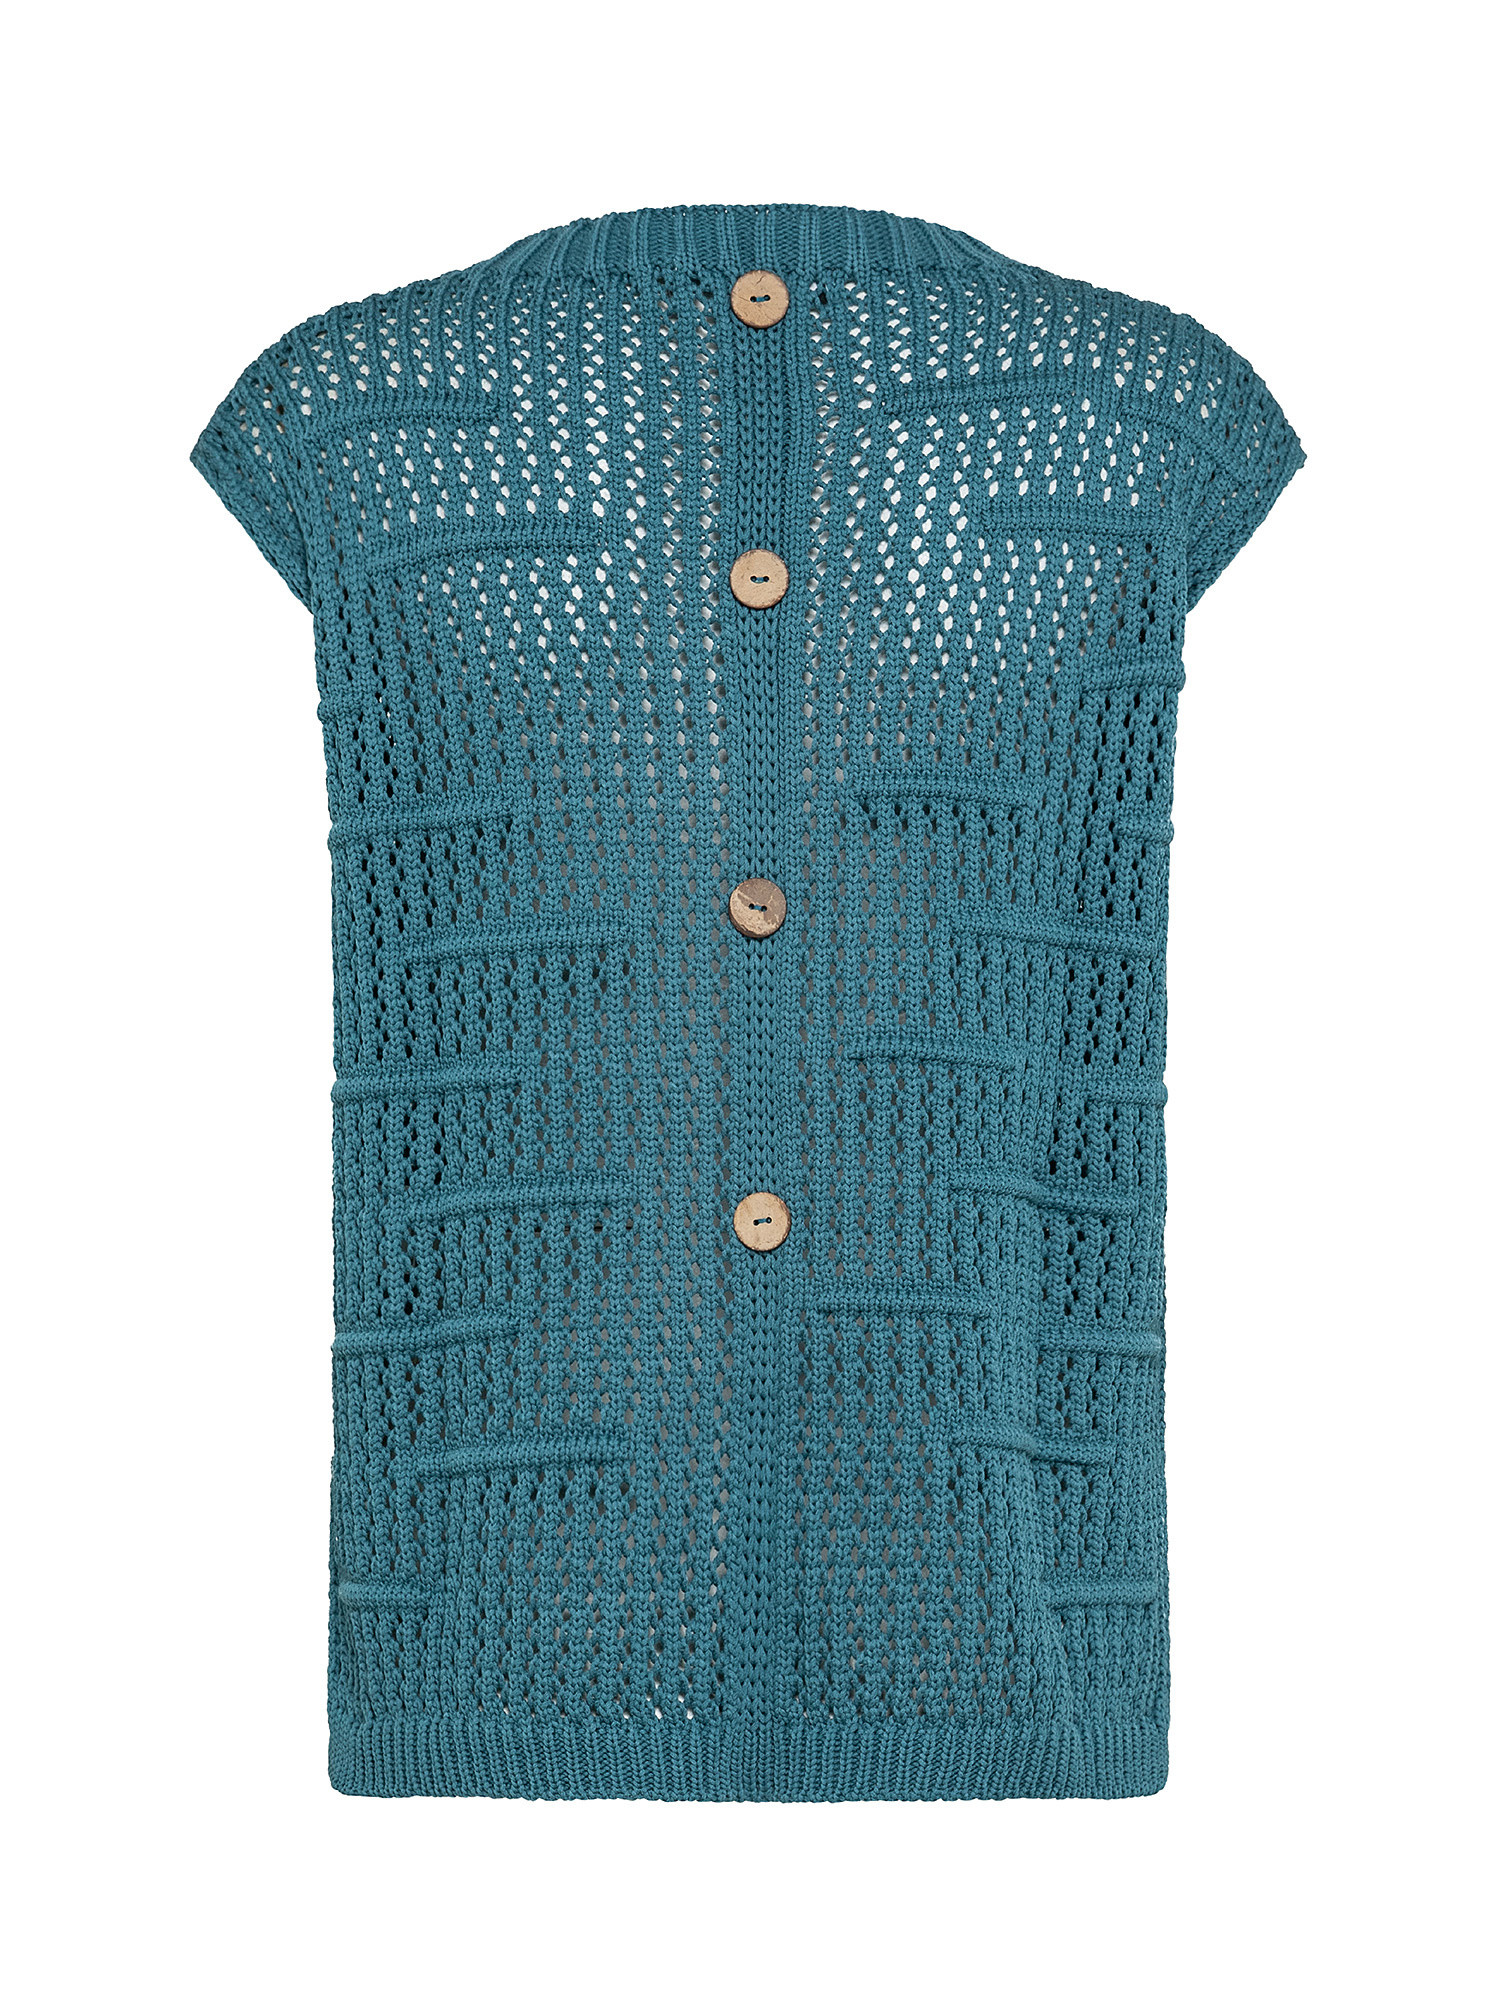 Tricot sweater, Turquoise, large image number 1